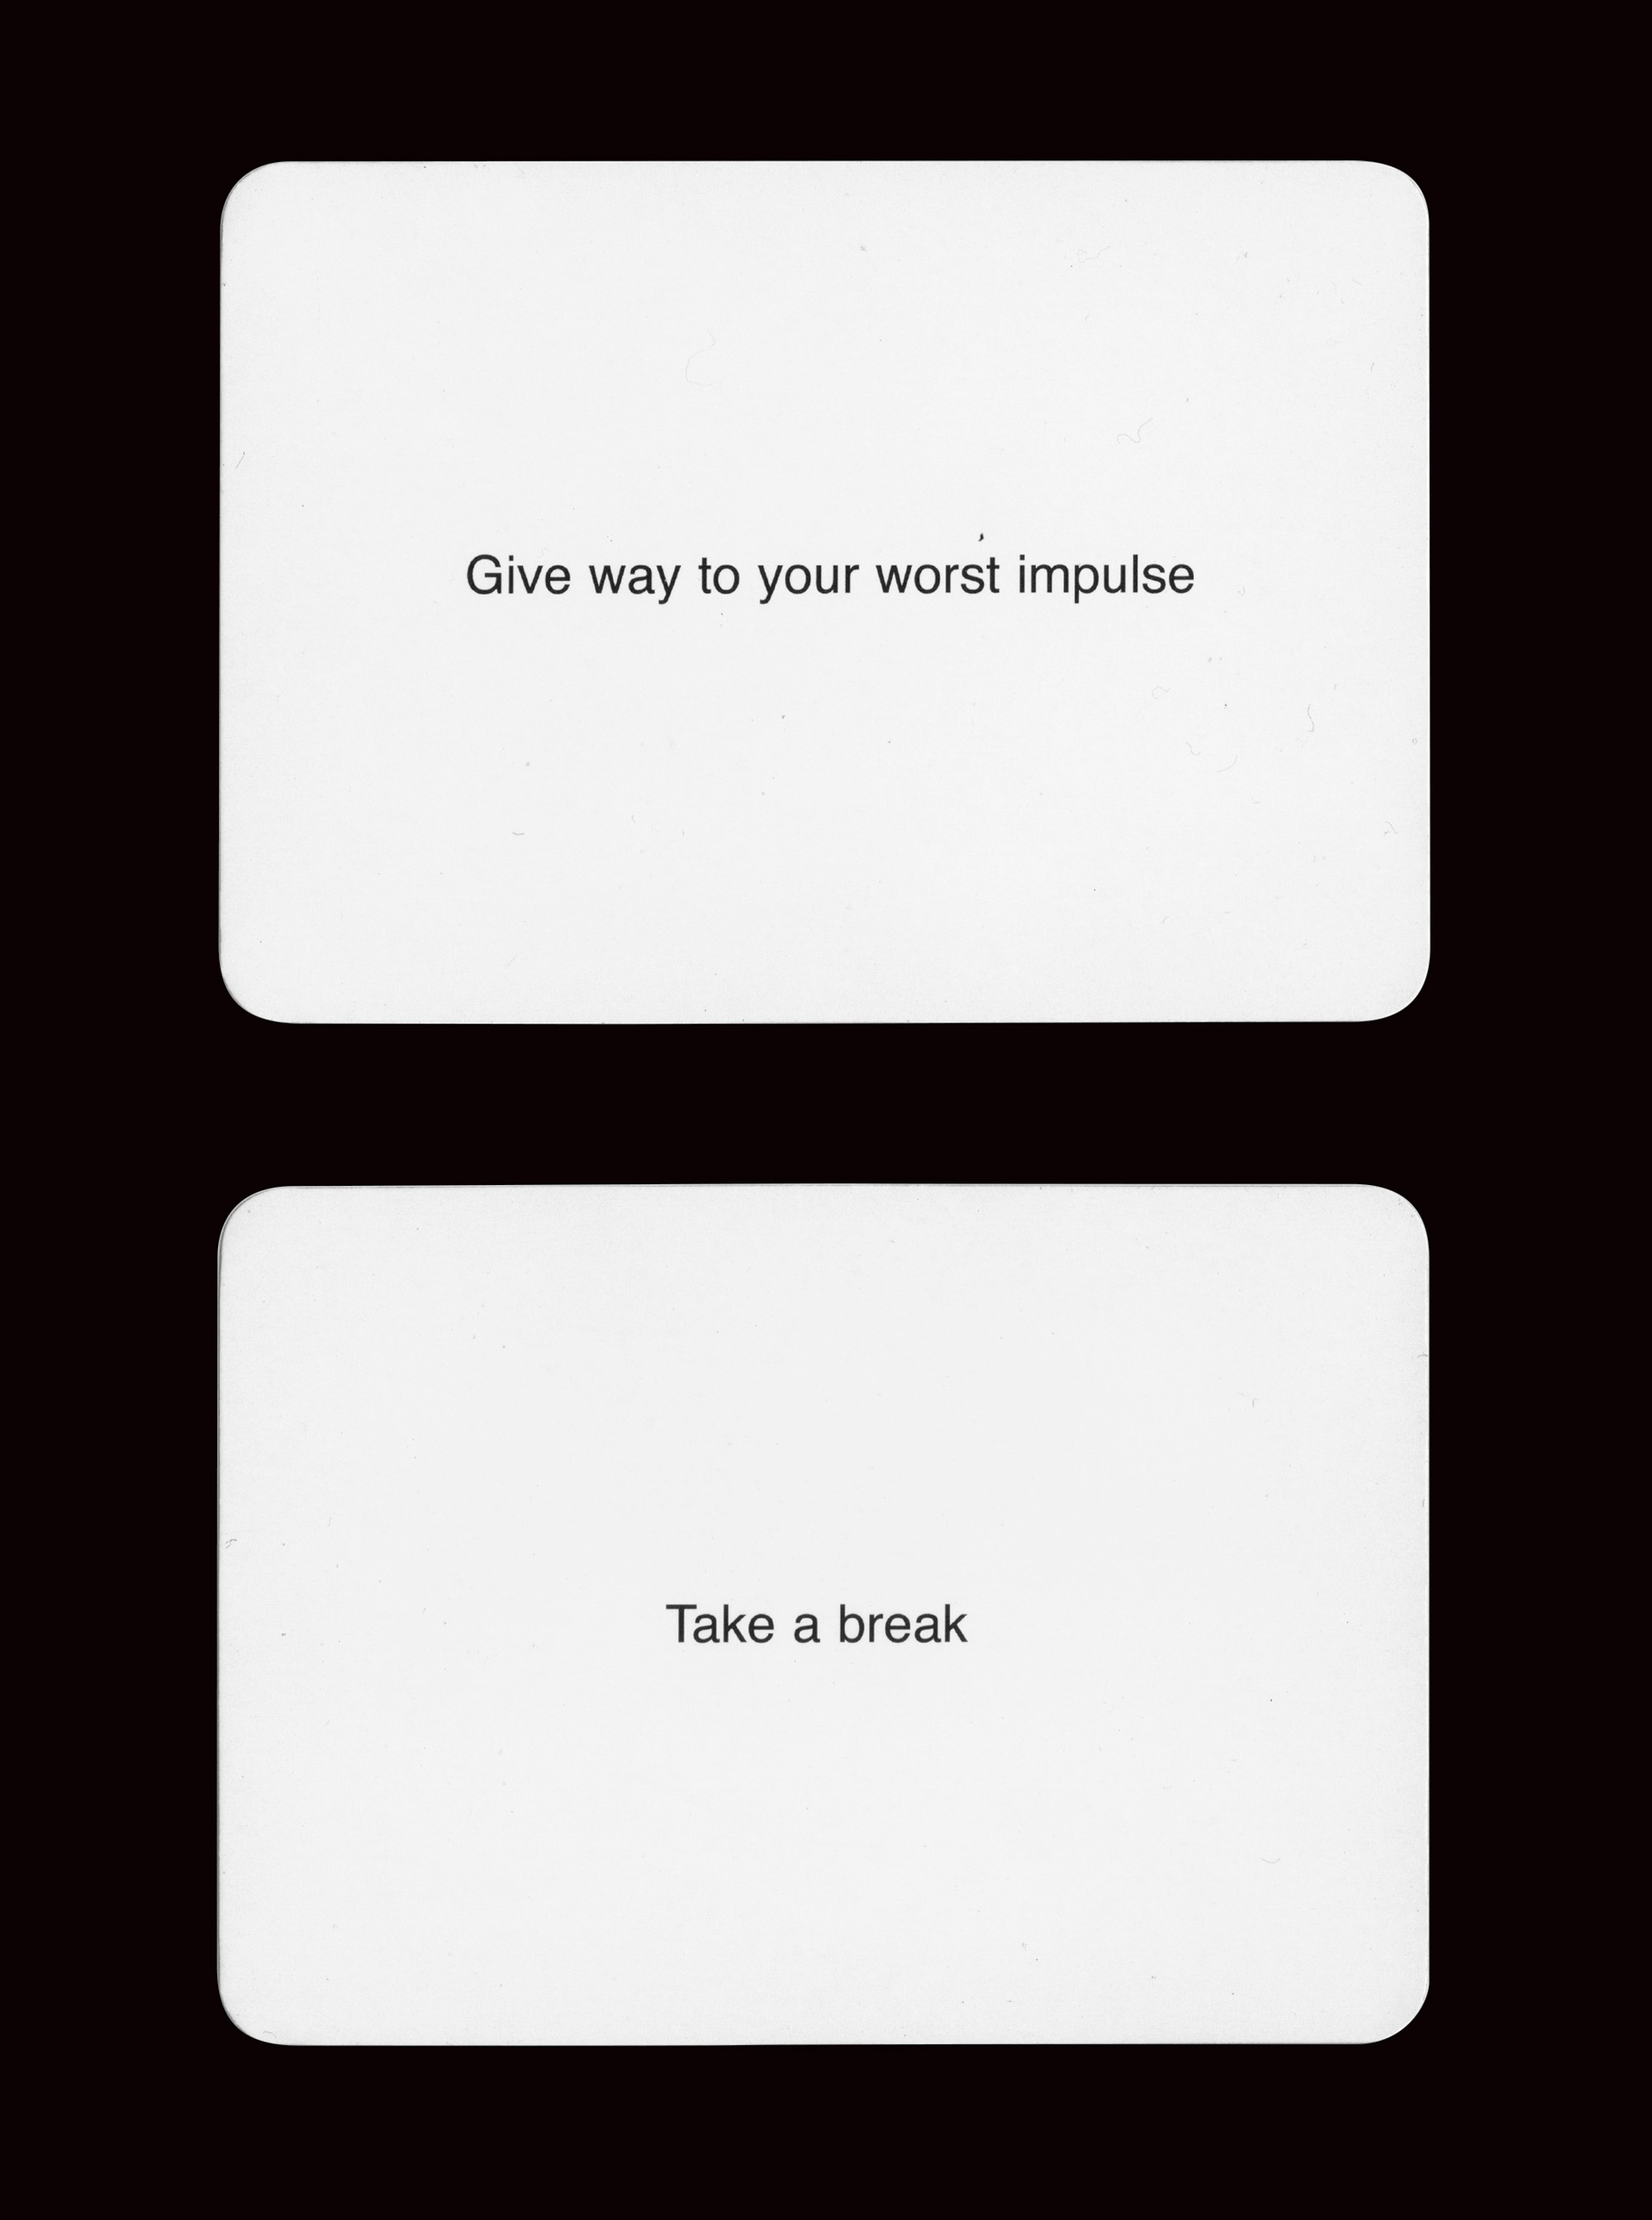 Cards from the two thousand and one edition of Brian Eno and Peter Schmidt’s nineteen seventy-five “Oblique Strategies” set. They read “Give way to your worst impulse” and “Take a break.”